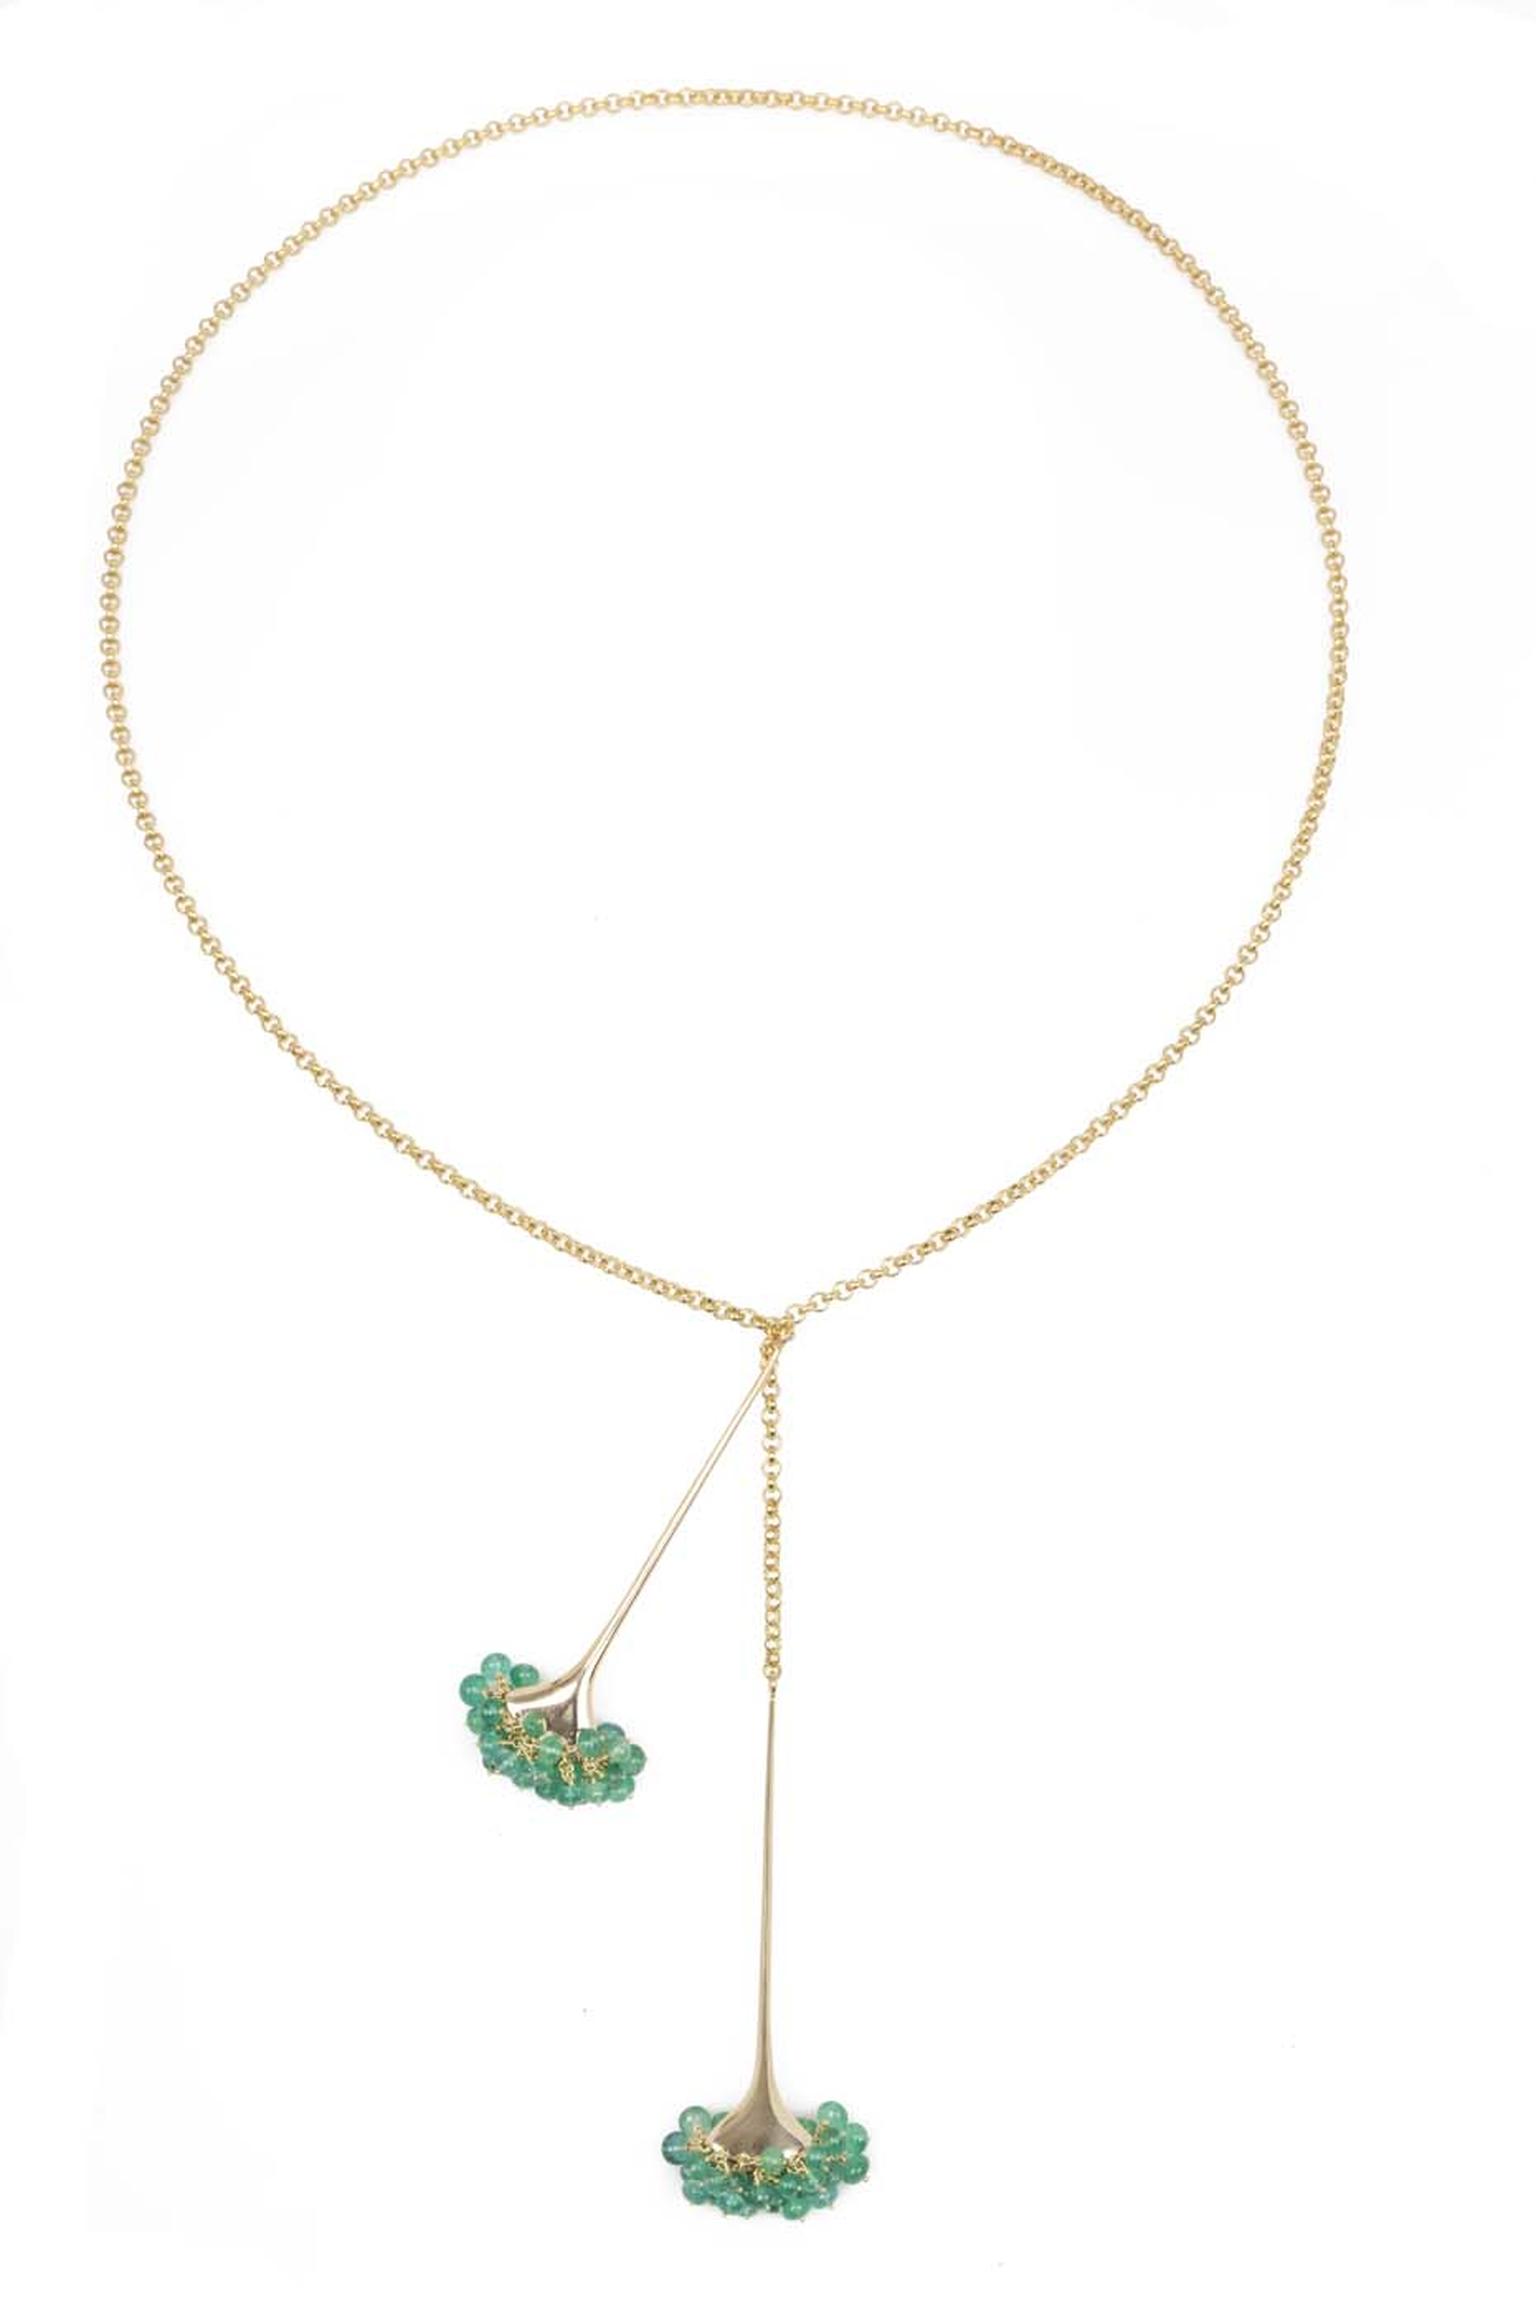 Gurmit Campbell gold Toga necklace featuring emerald beads.